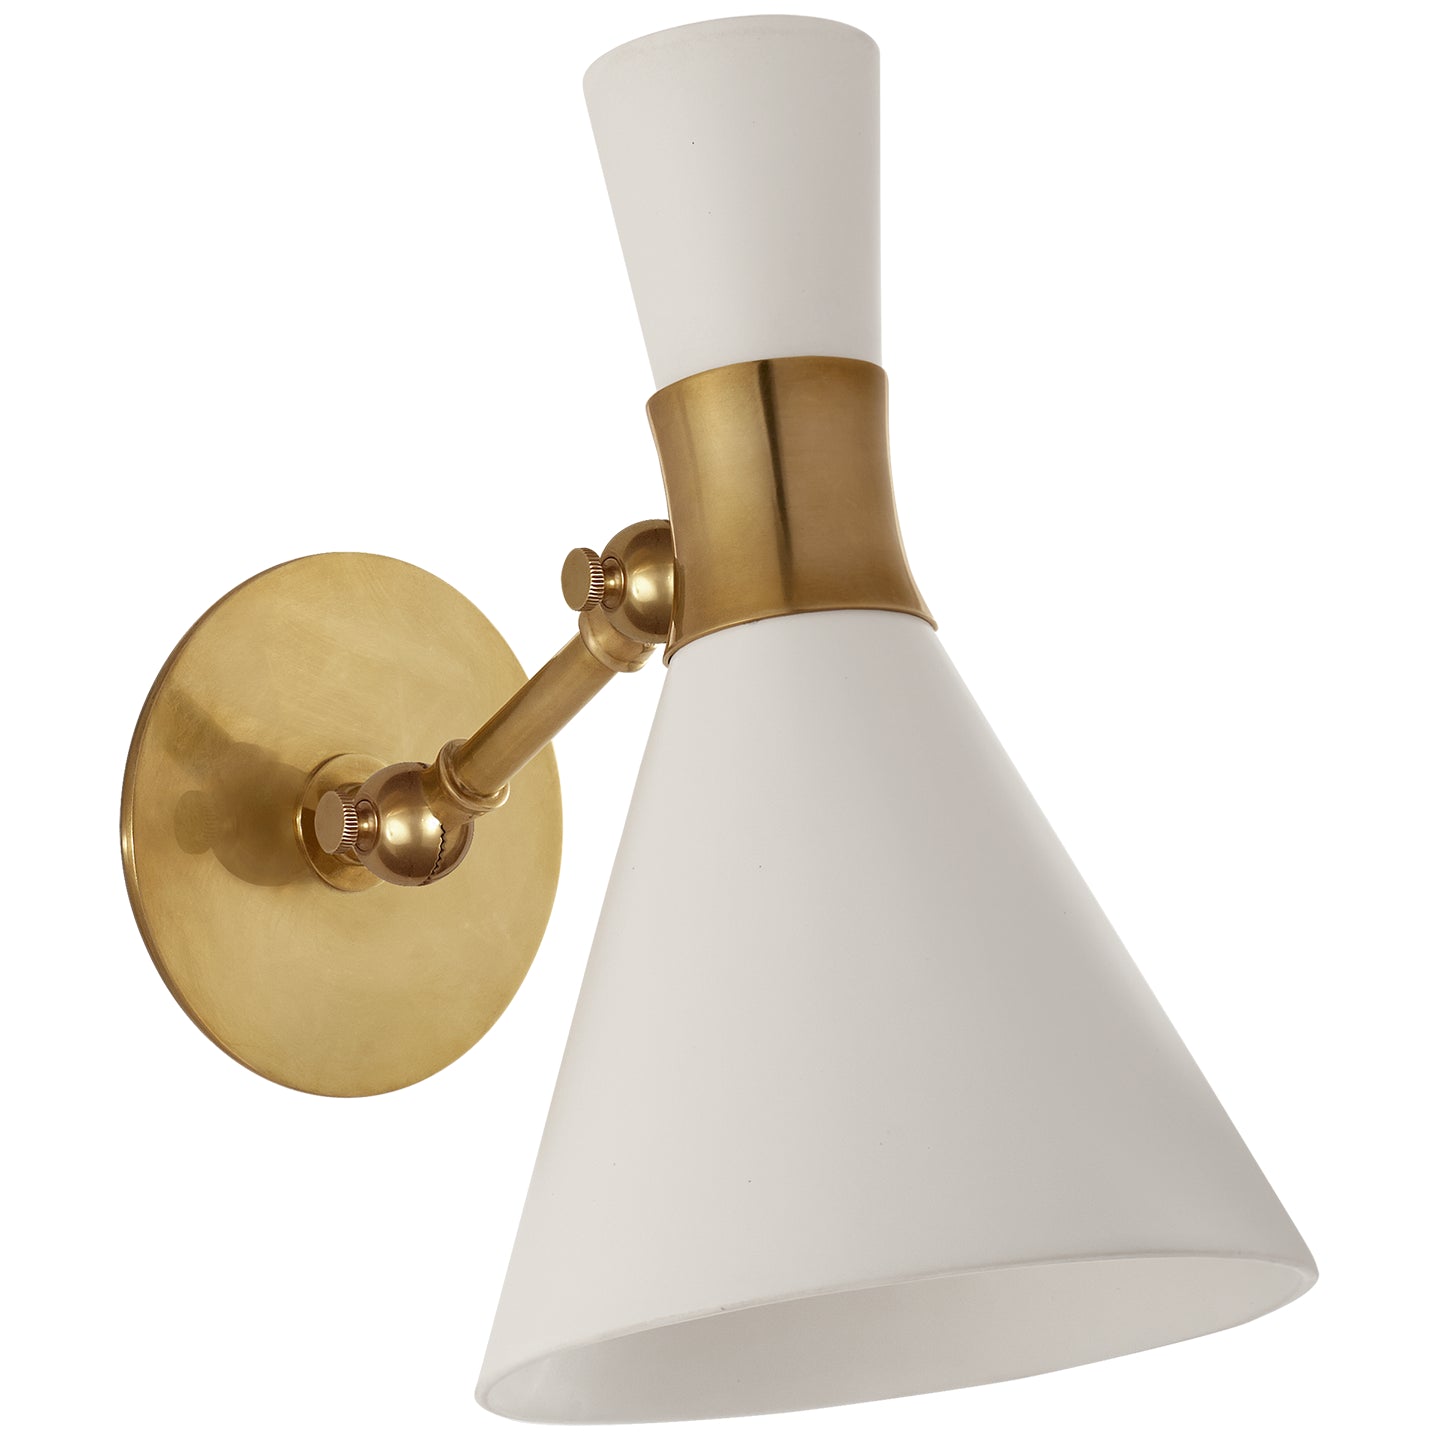 Visual Comfort Signature - S 2640HAB-WHT - One Light Wall Sconce - Liam - Hand-Rubbed Antique Brass